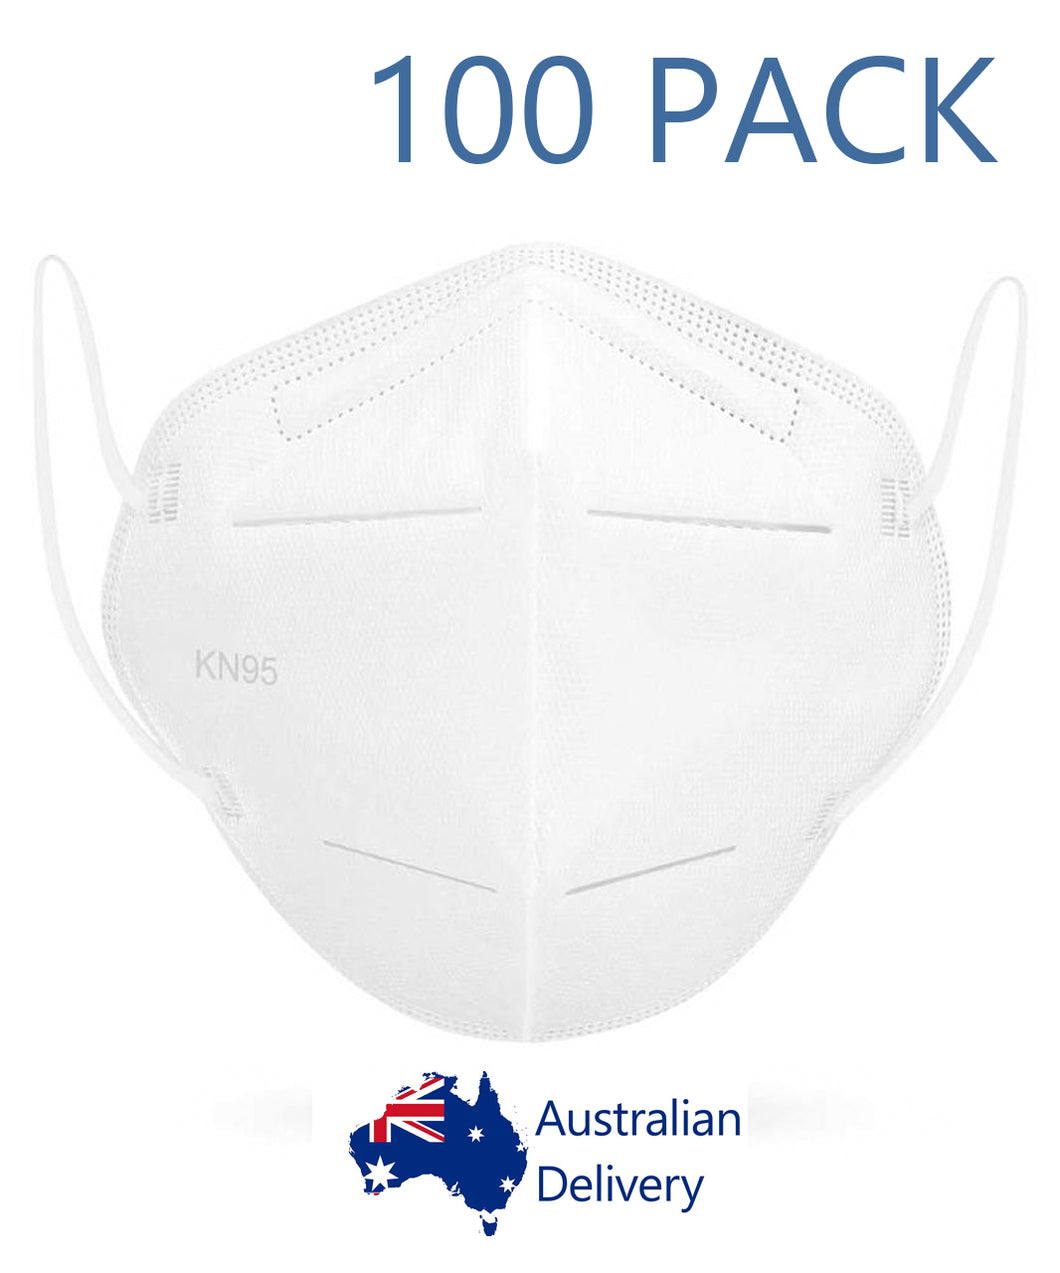 KN95 Masks (100 pack)                IN STOCK - BUY NOW